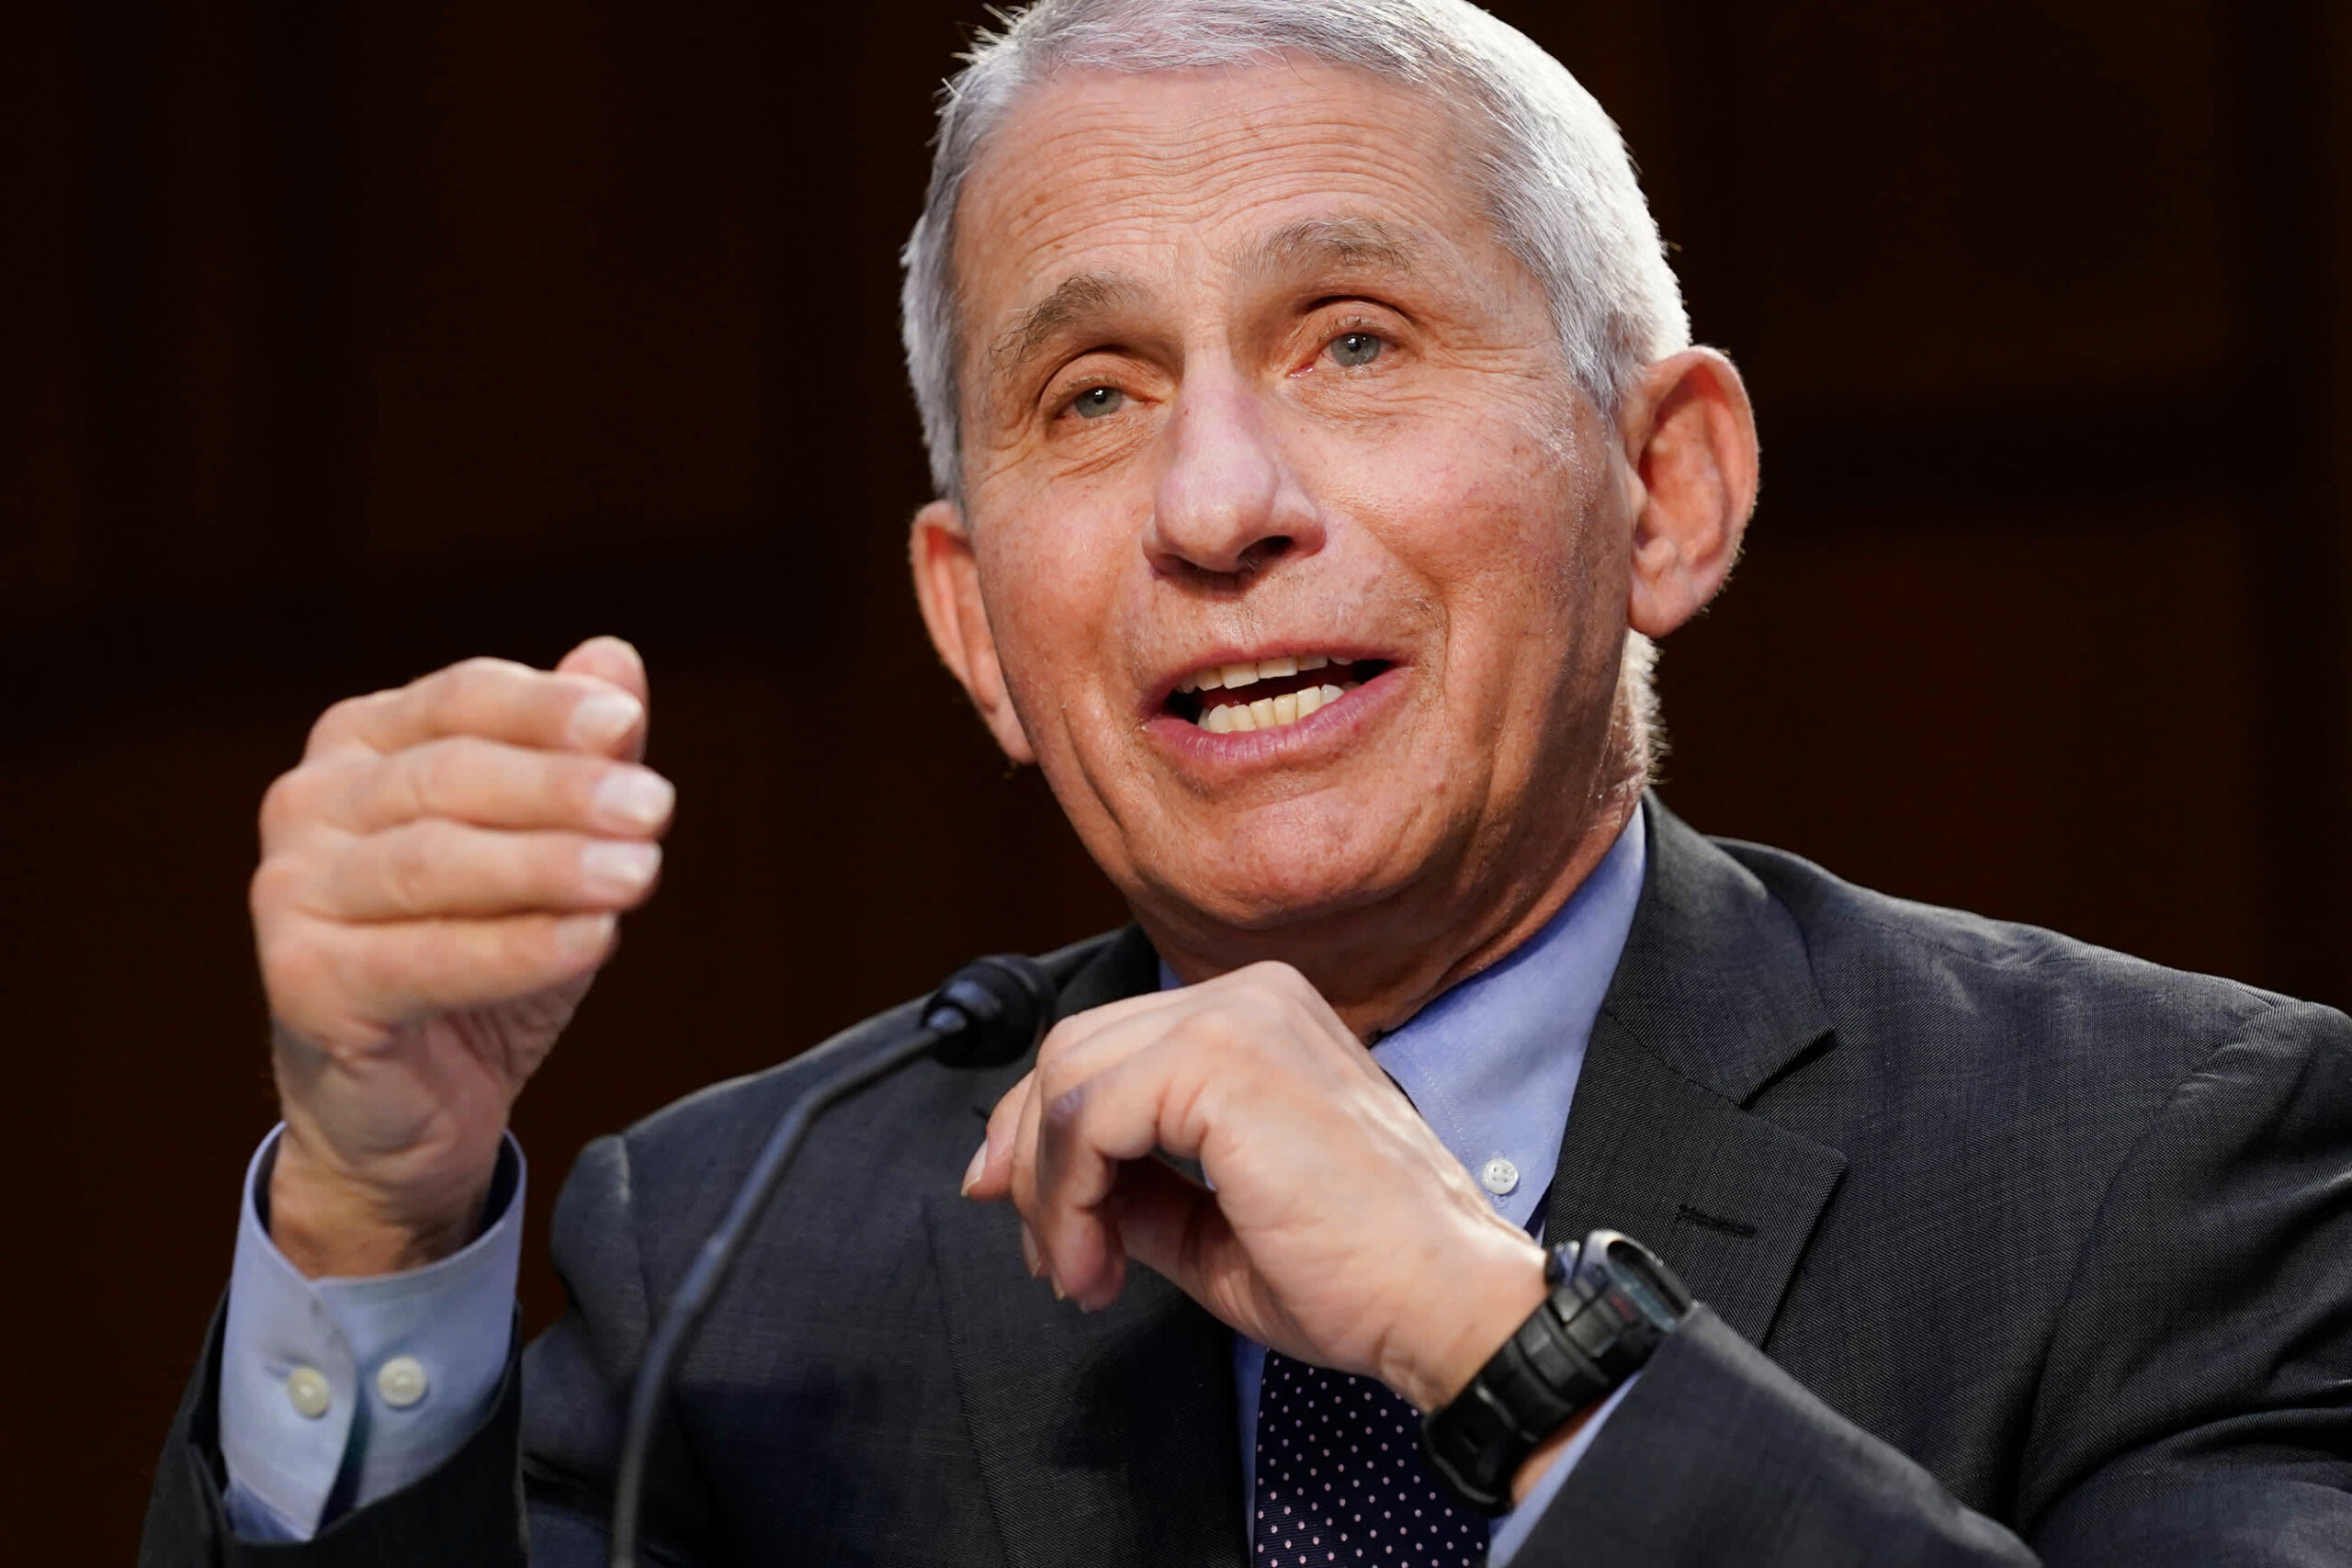 Fauci predicts omicron Covid wave will peak in U.S. by end of January